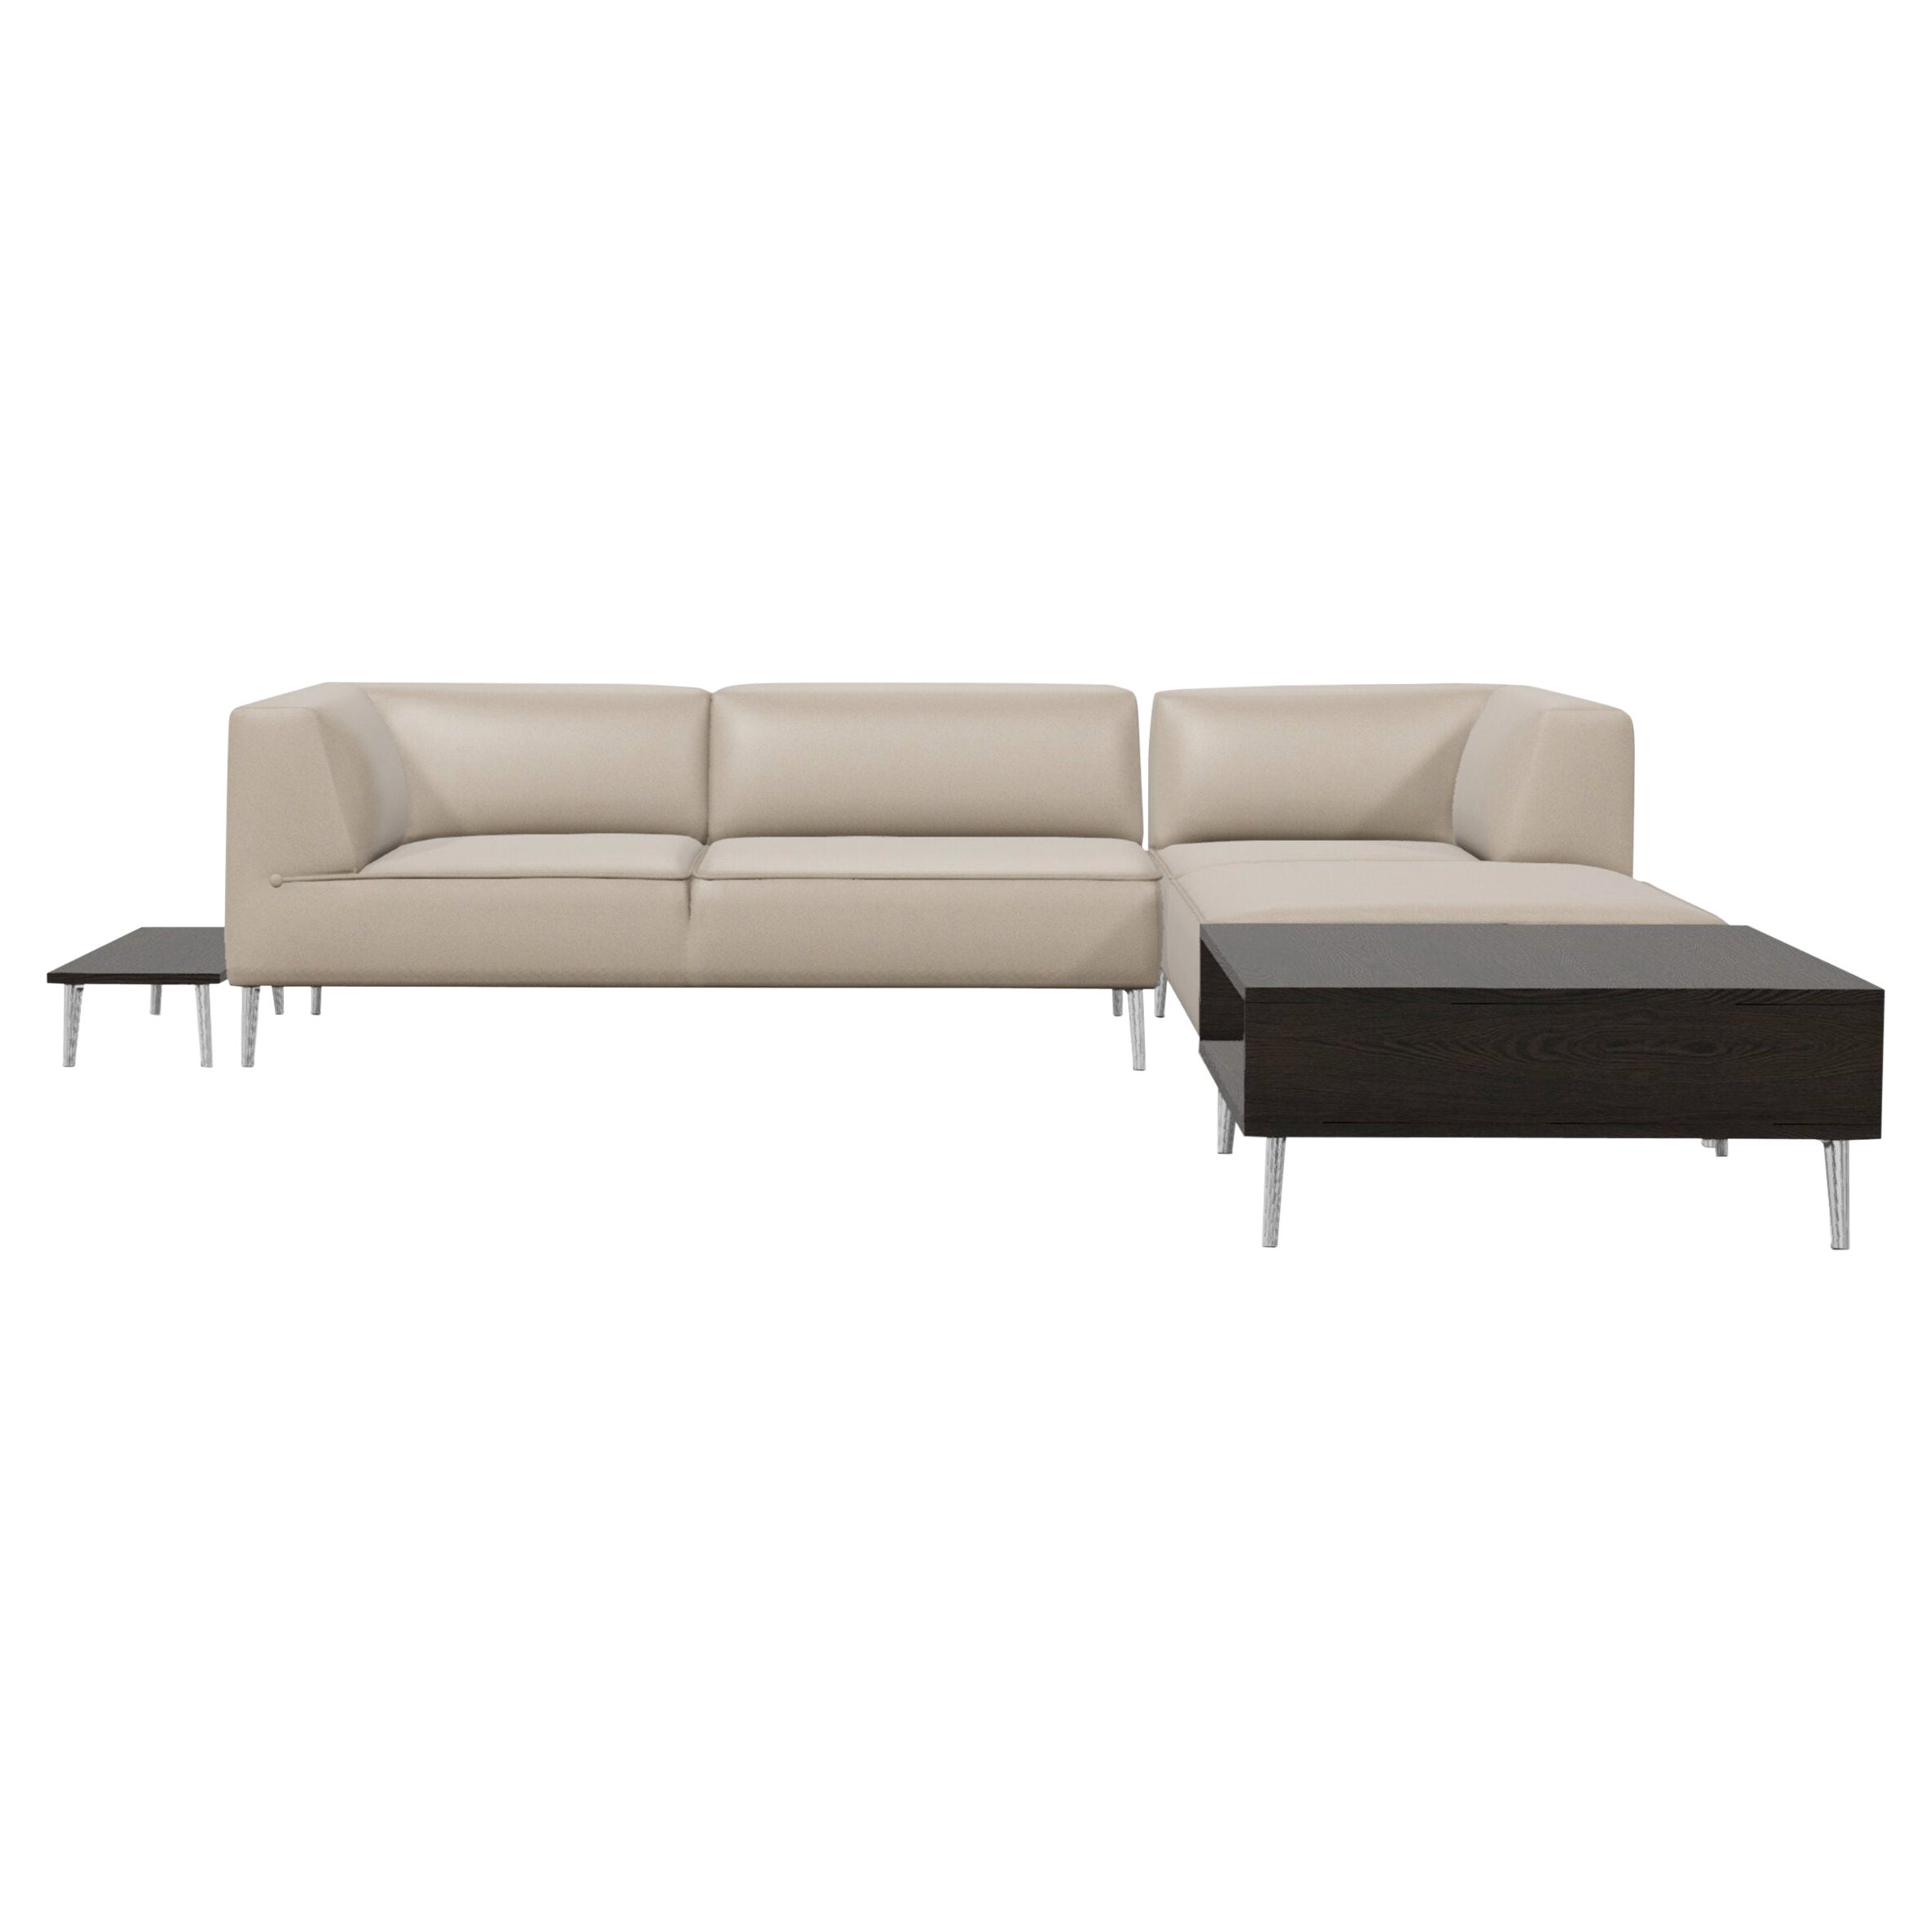 Moooi Sofa So Good Chaise Longue Right with Elements in Abbracci, Oyster Foam For Sale